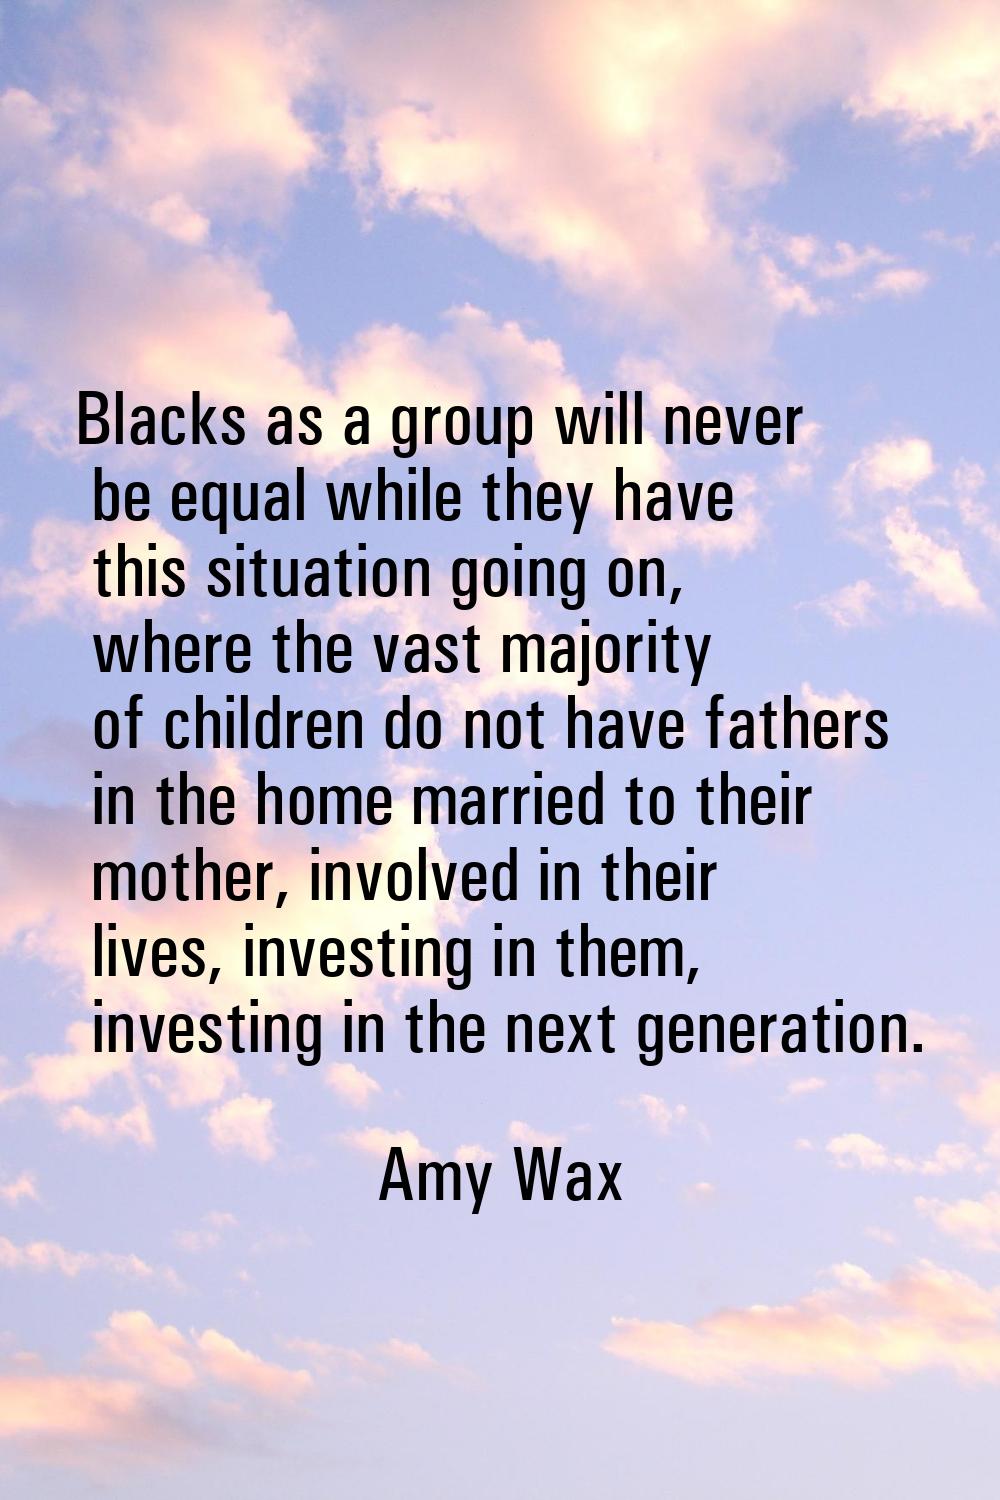 Blacks as a group will never be equal while they have this situation going on, where the vast major